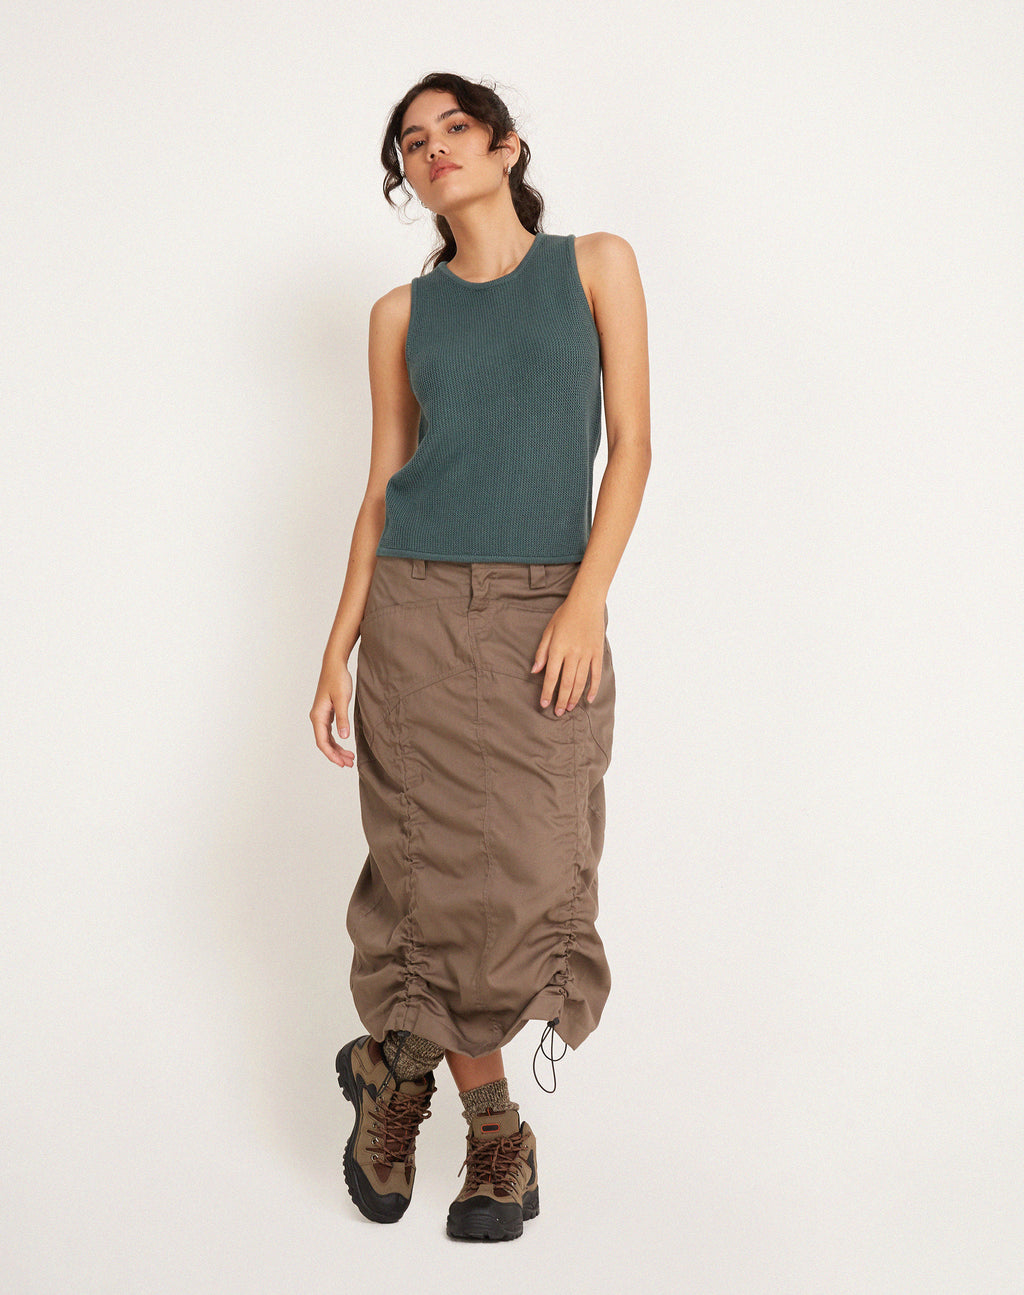 Phindi Knitted Vest in Khaki